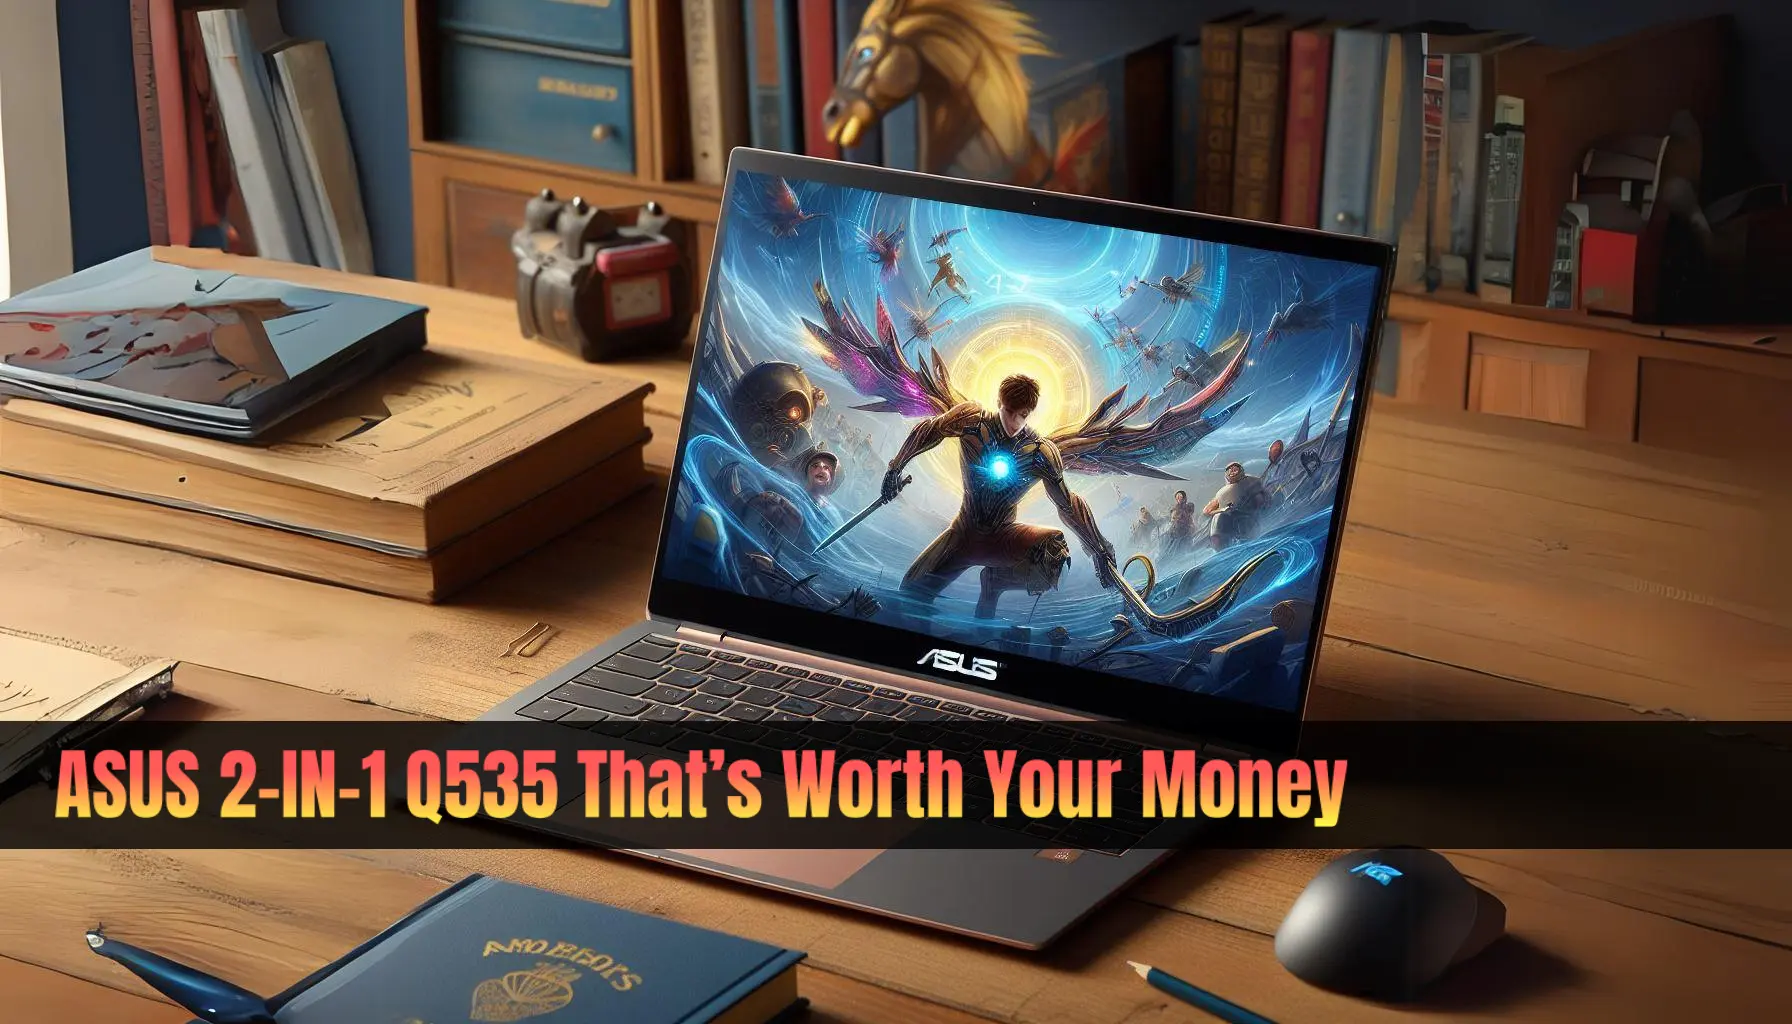 ASUS 2-IN-1 Q535 That’s Worth Your Money